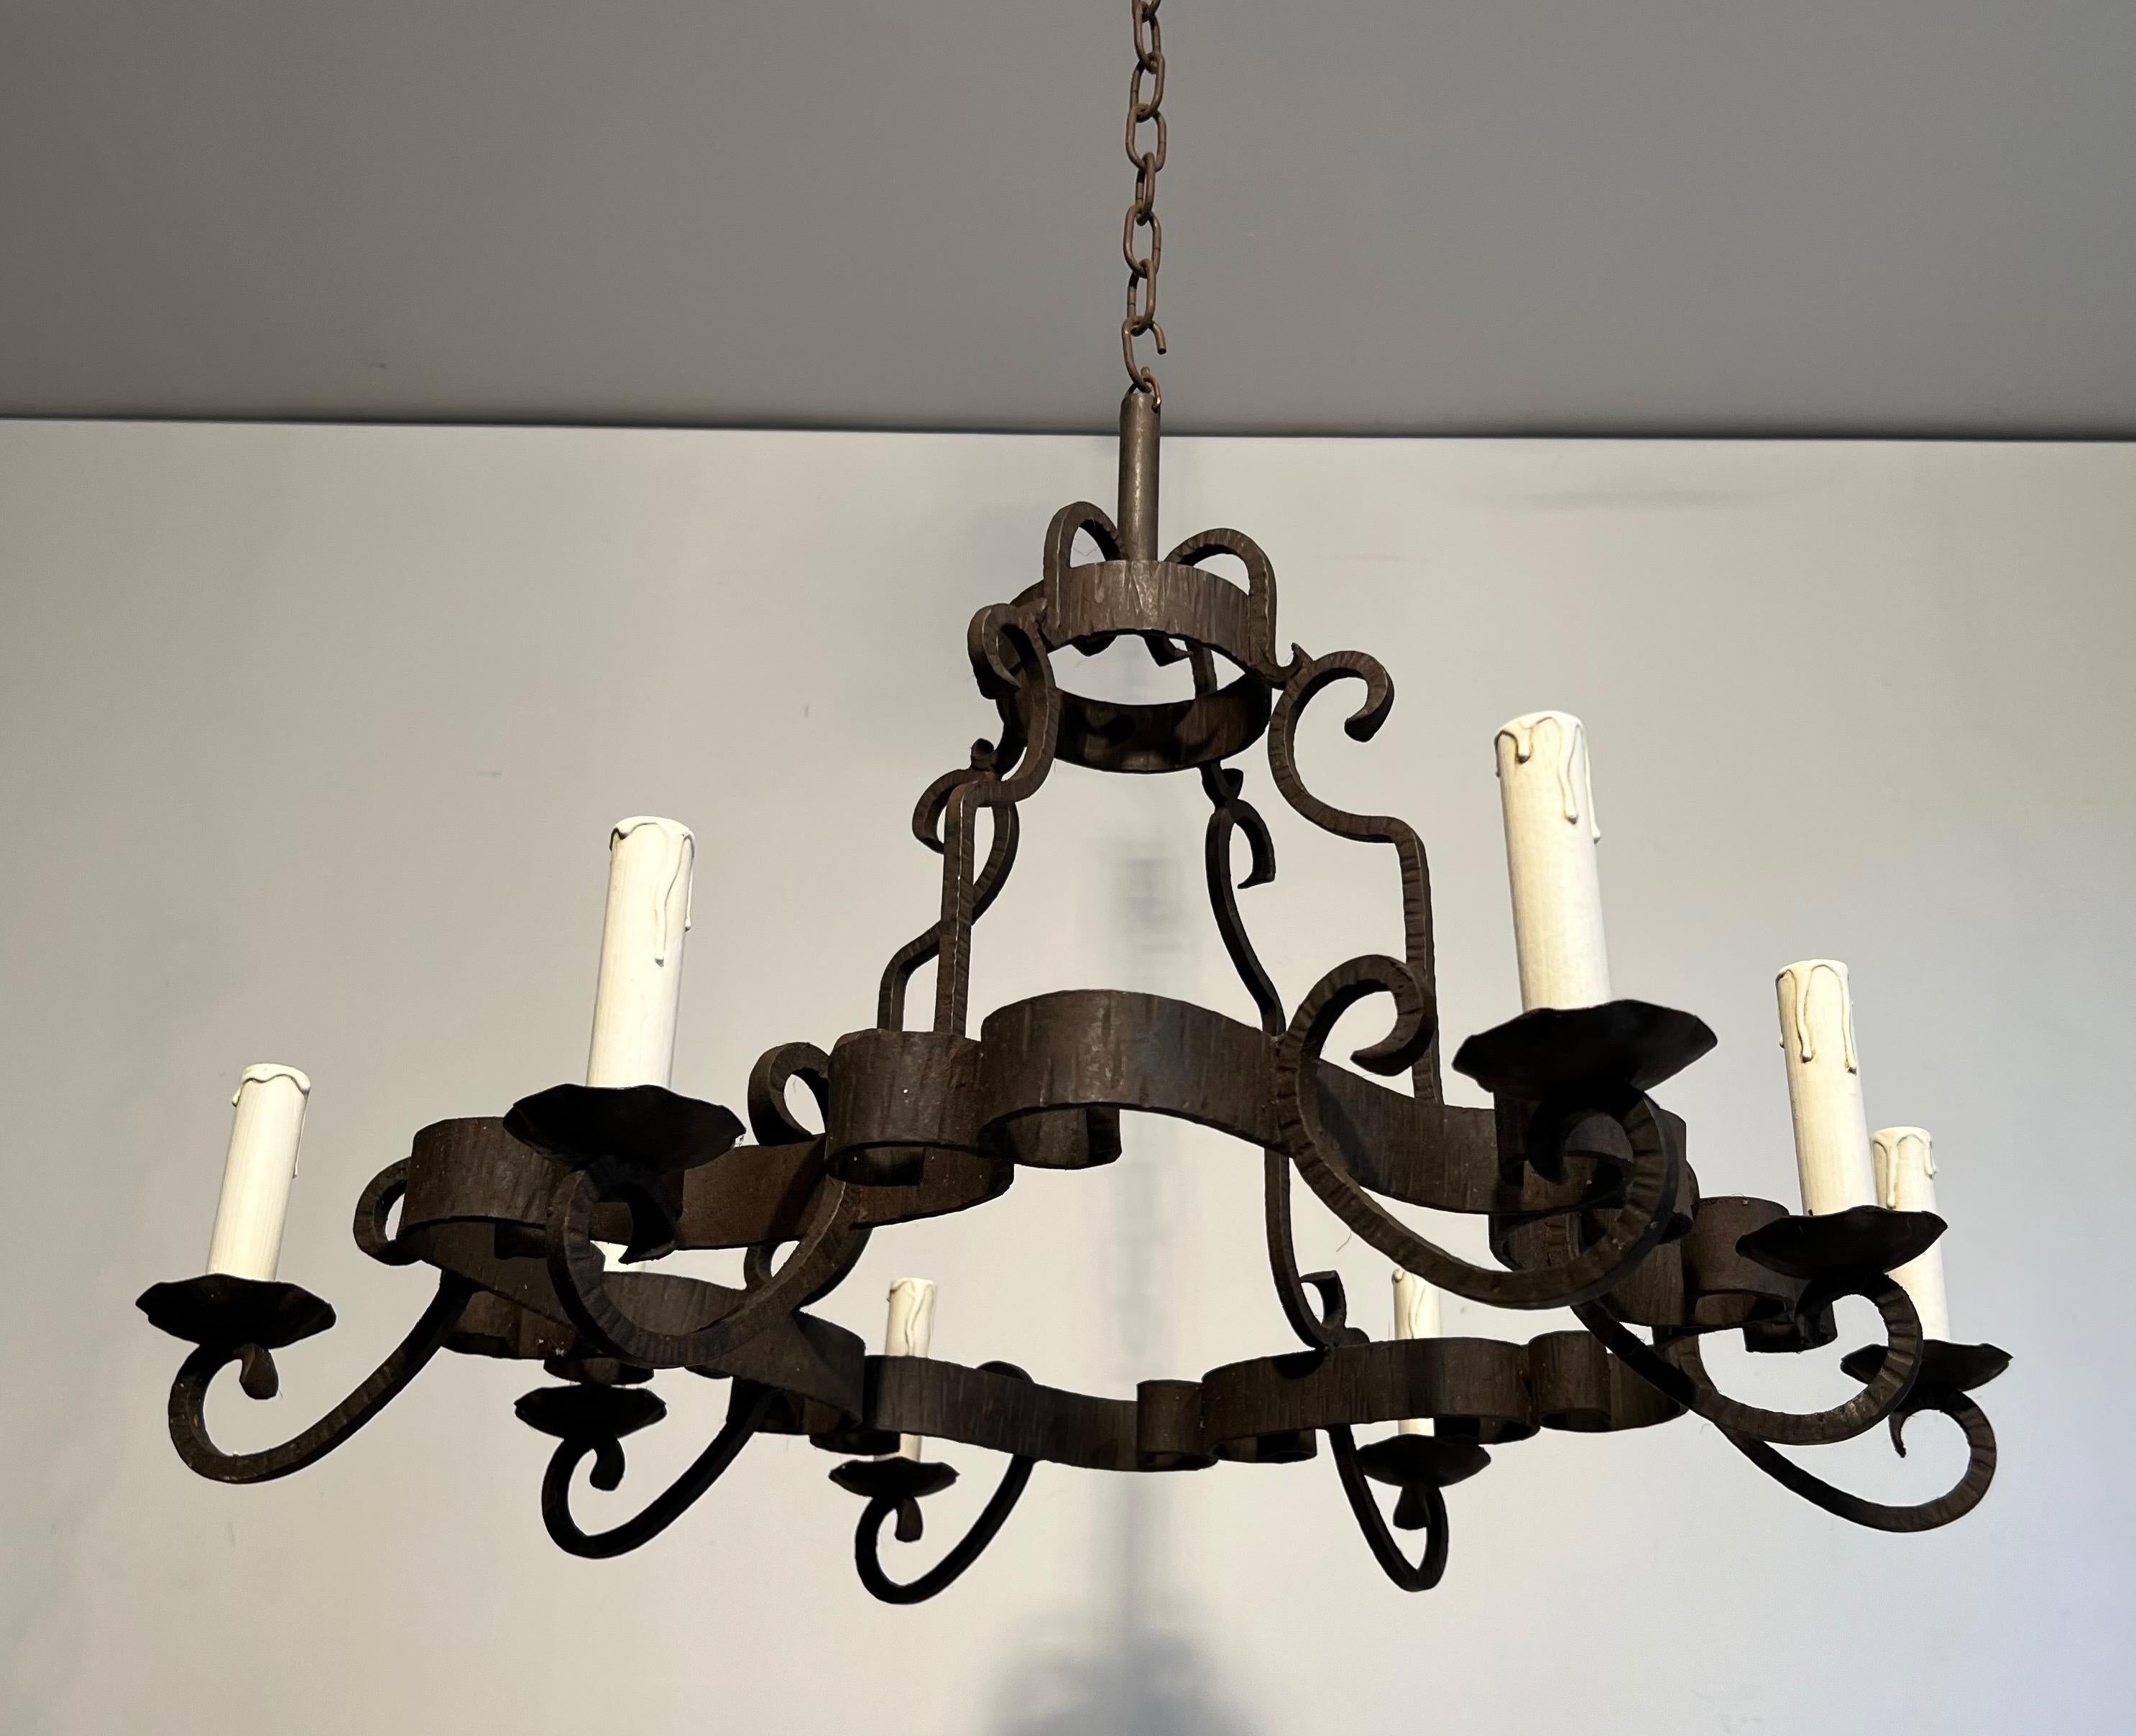 This 8 lights chandelier. is made of a wrought iron. This is a nice French work. Circa 1950